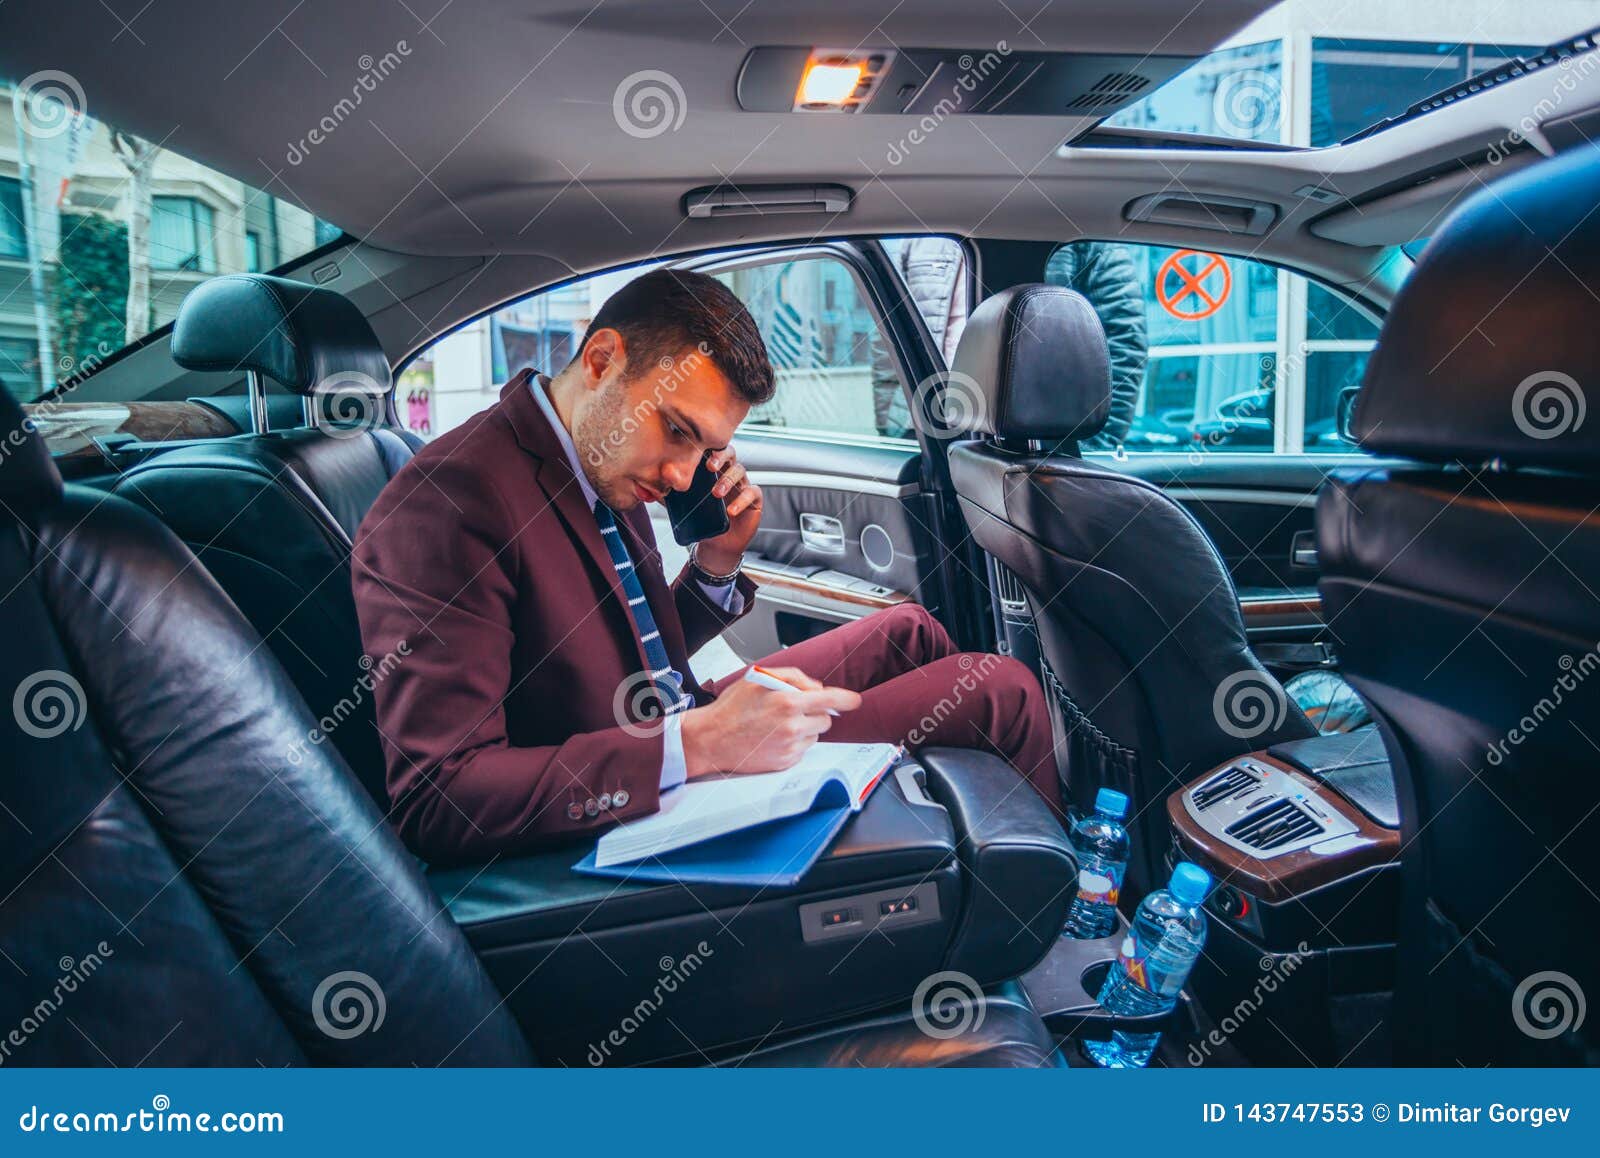 businessman sitting in a limo while talking on his phone reading his notes and planning his day